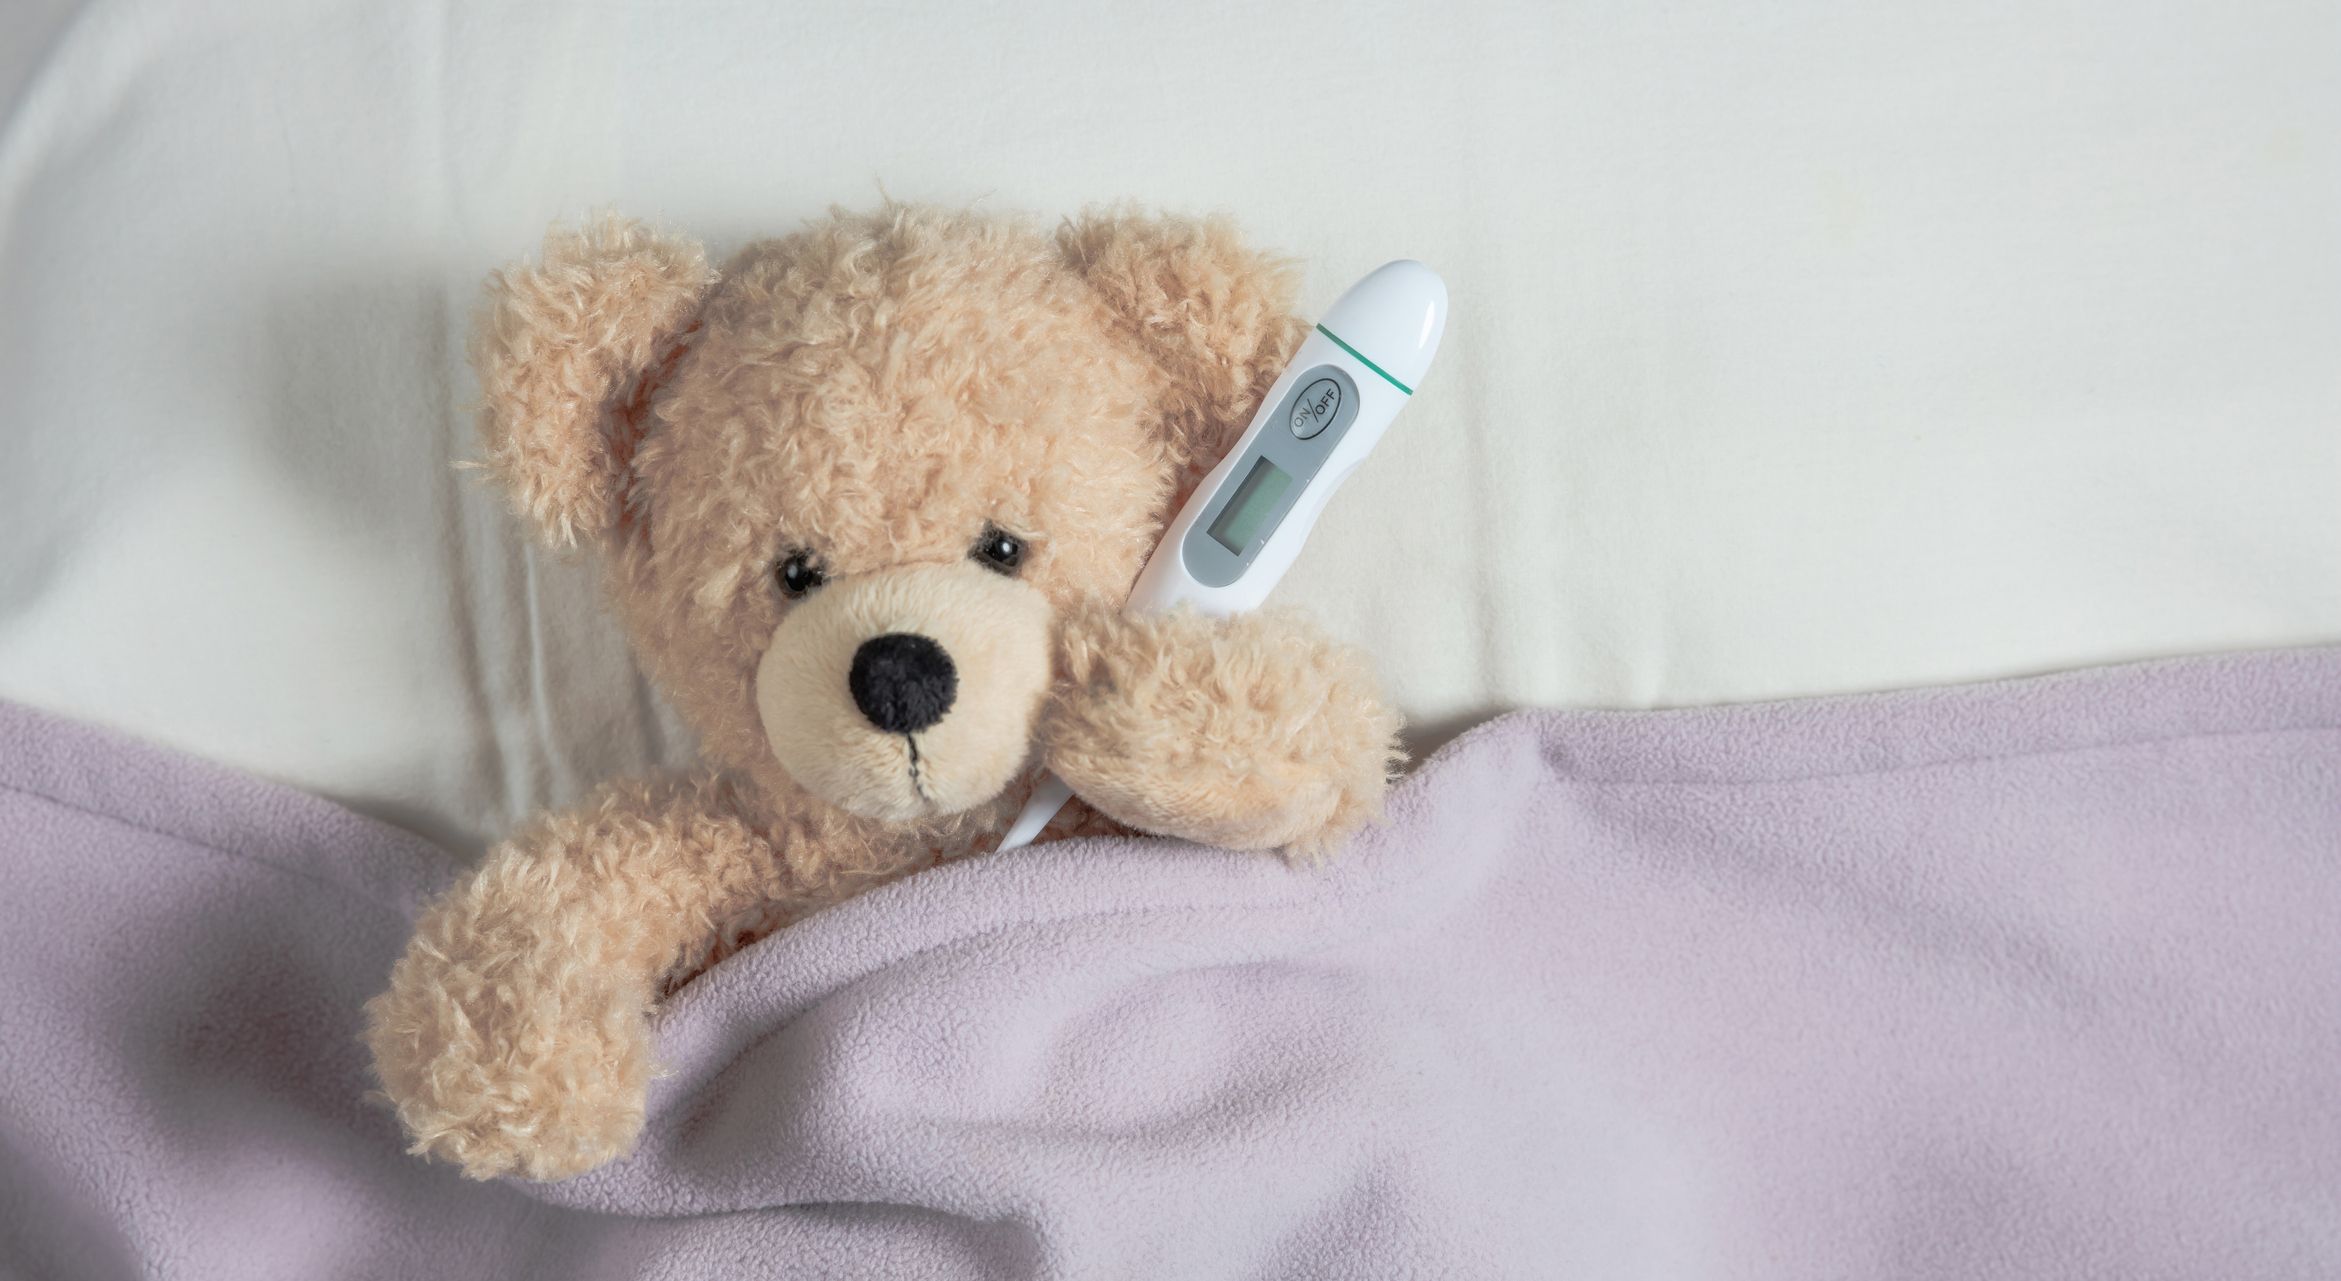 A teddybear holding a thermometer in bed. | Source: Shutterstock